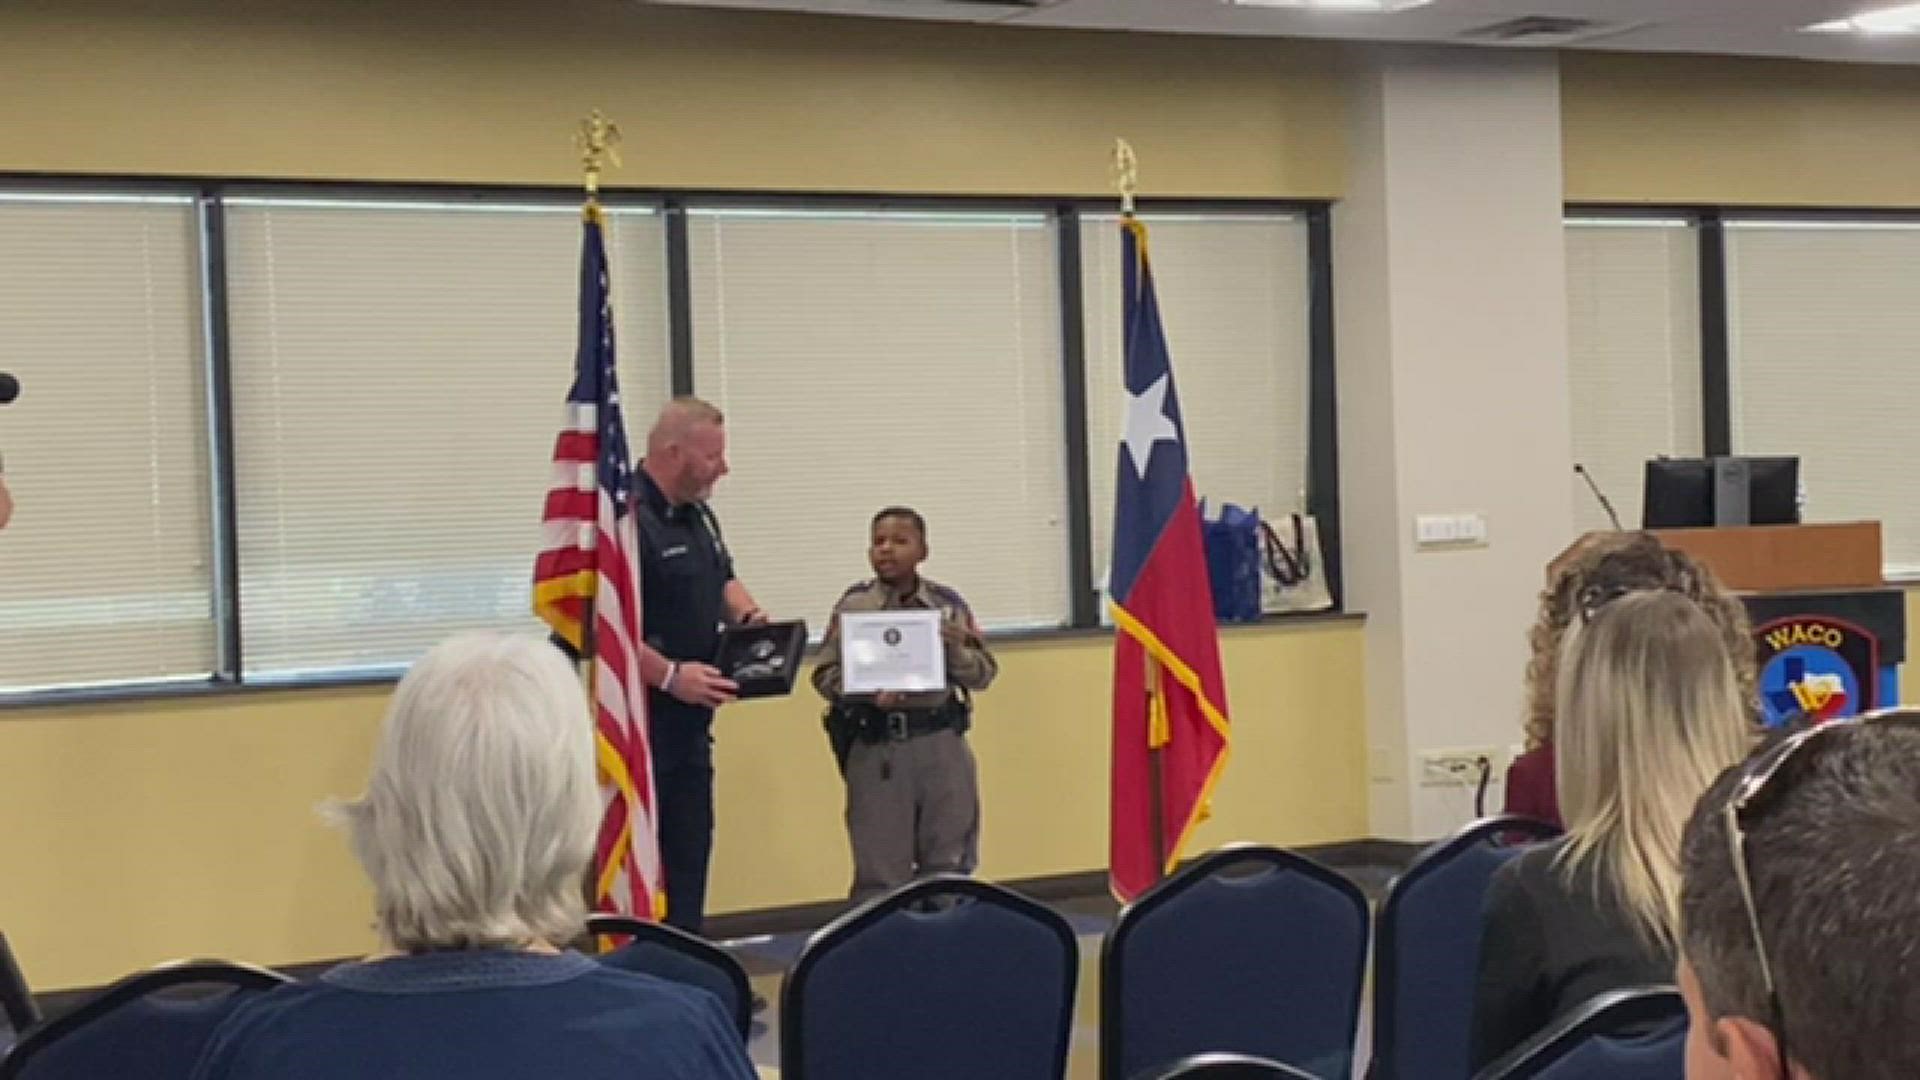 Waco Police Department along with surrounding Law Enforcement agencies will be swearing in 10-year-old Devarjaye Daniel as an honorary police officer of their agency